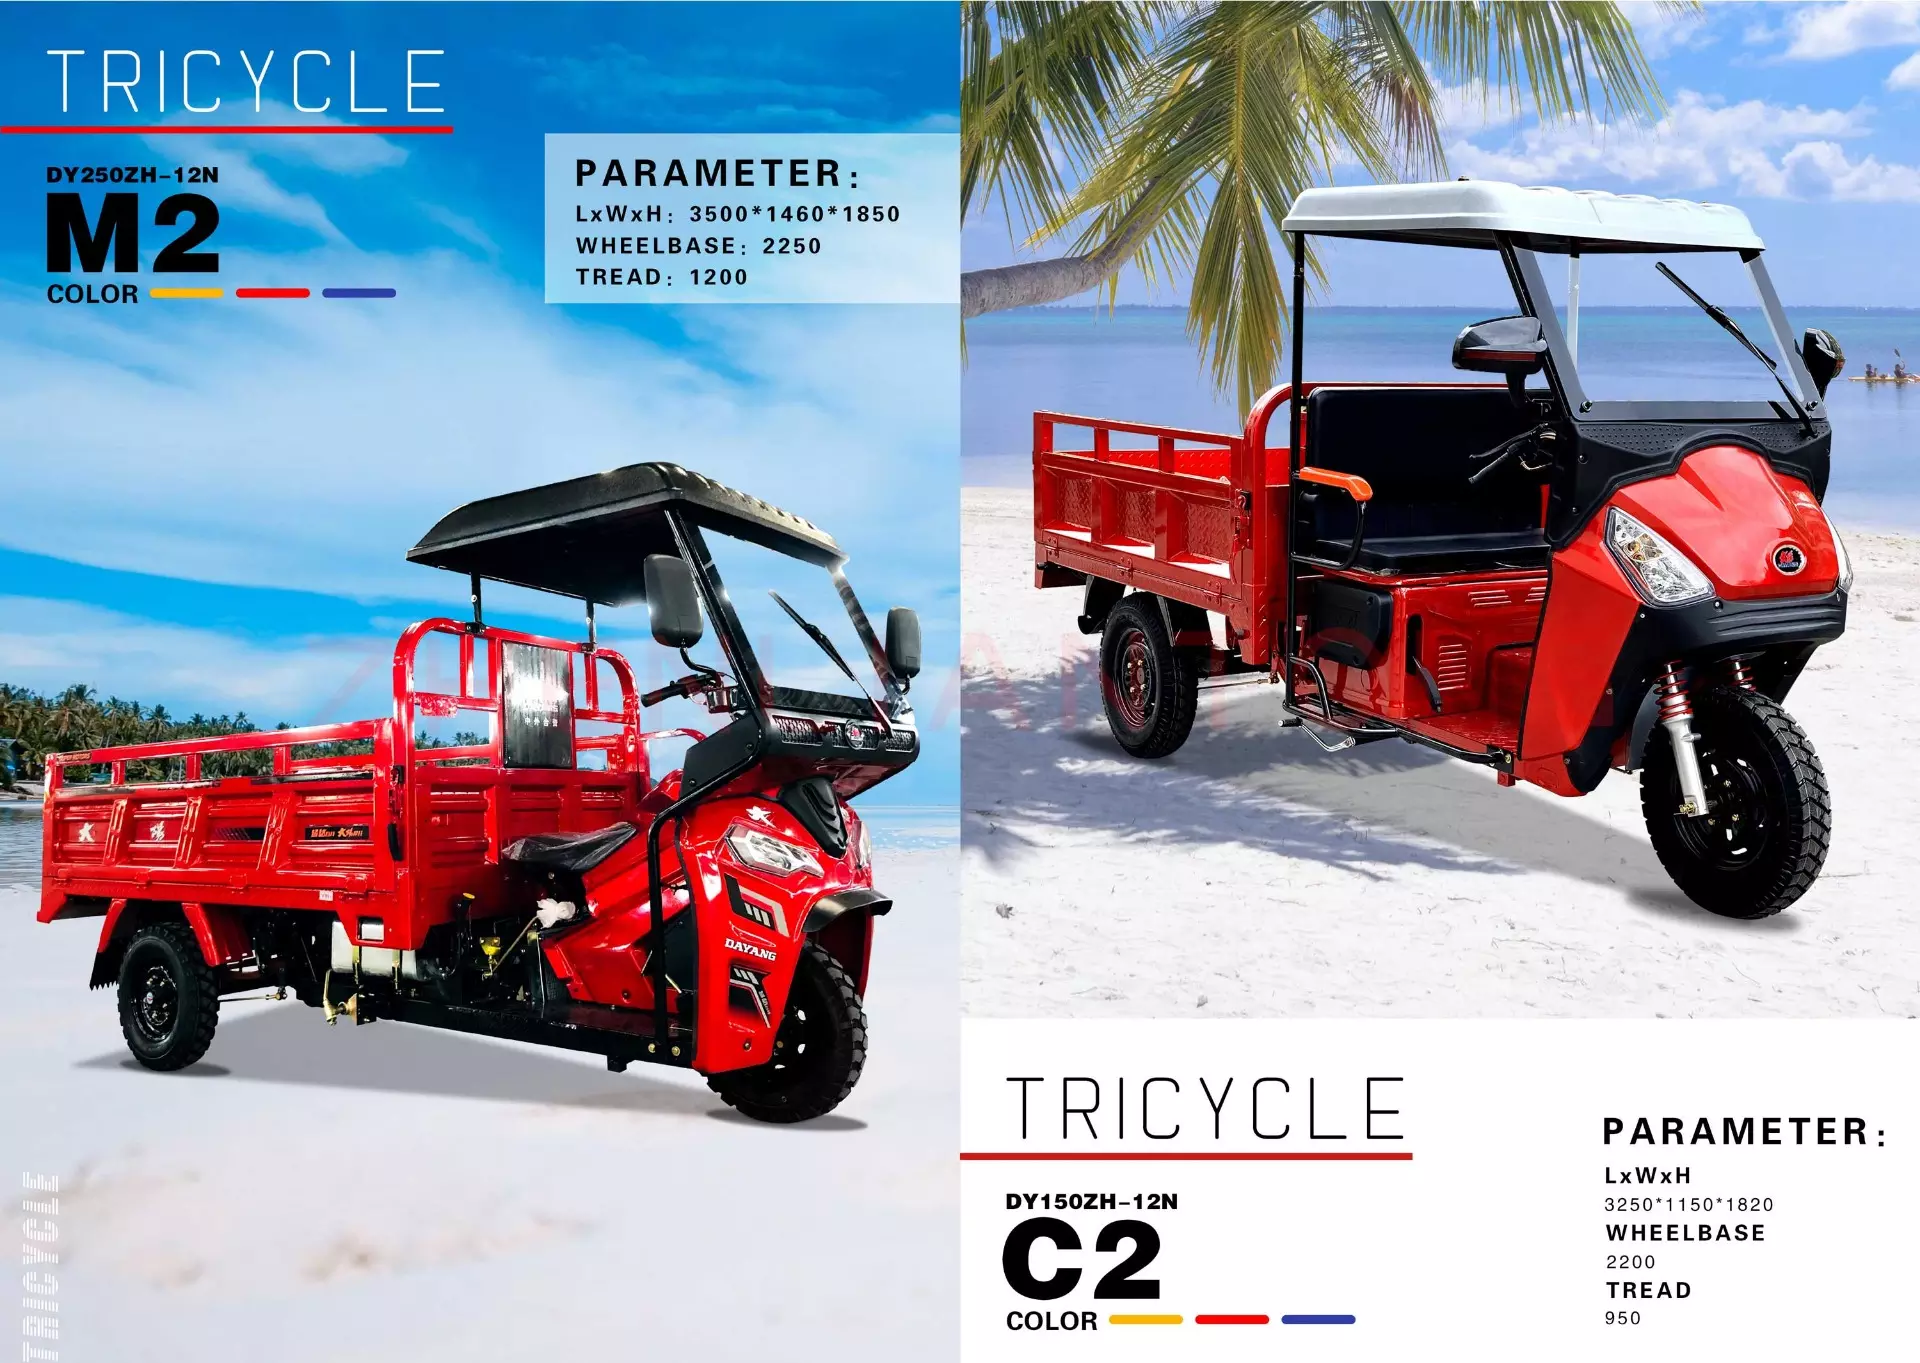 DAYANG Brand well sell electric tricycles passenger 3 wheel motorcycle cheap price electric rickshaw 500w 48V big power